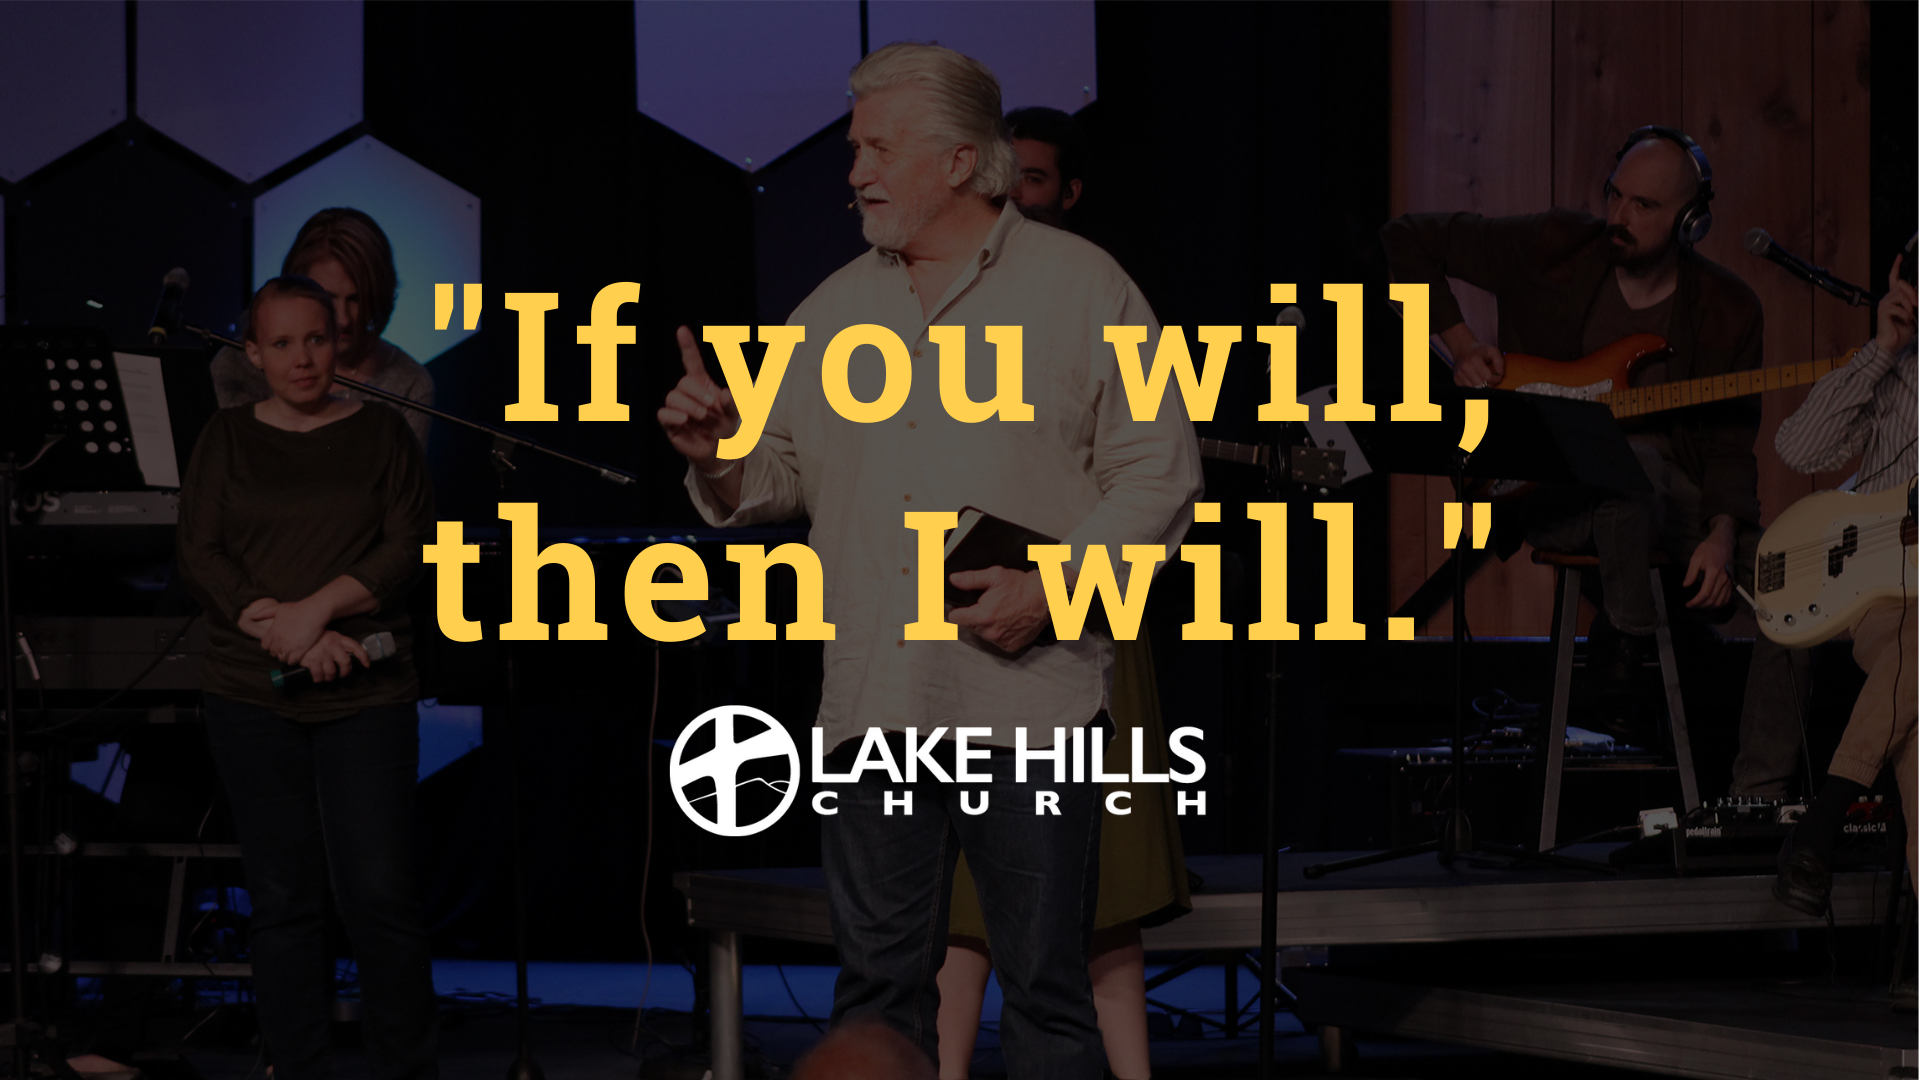 “If you will, then I will.” – God